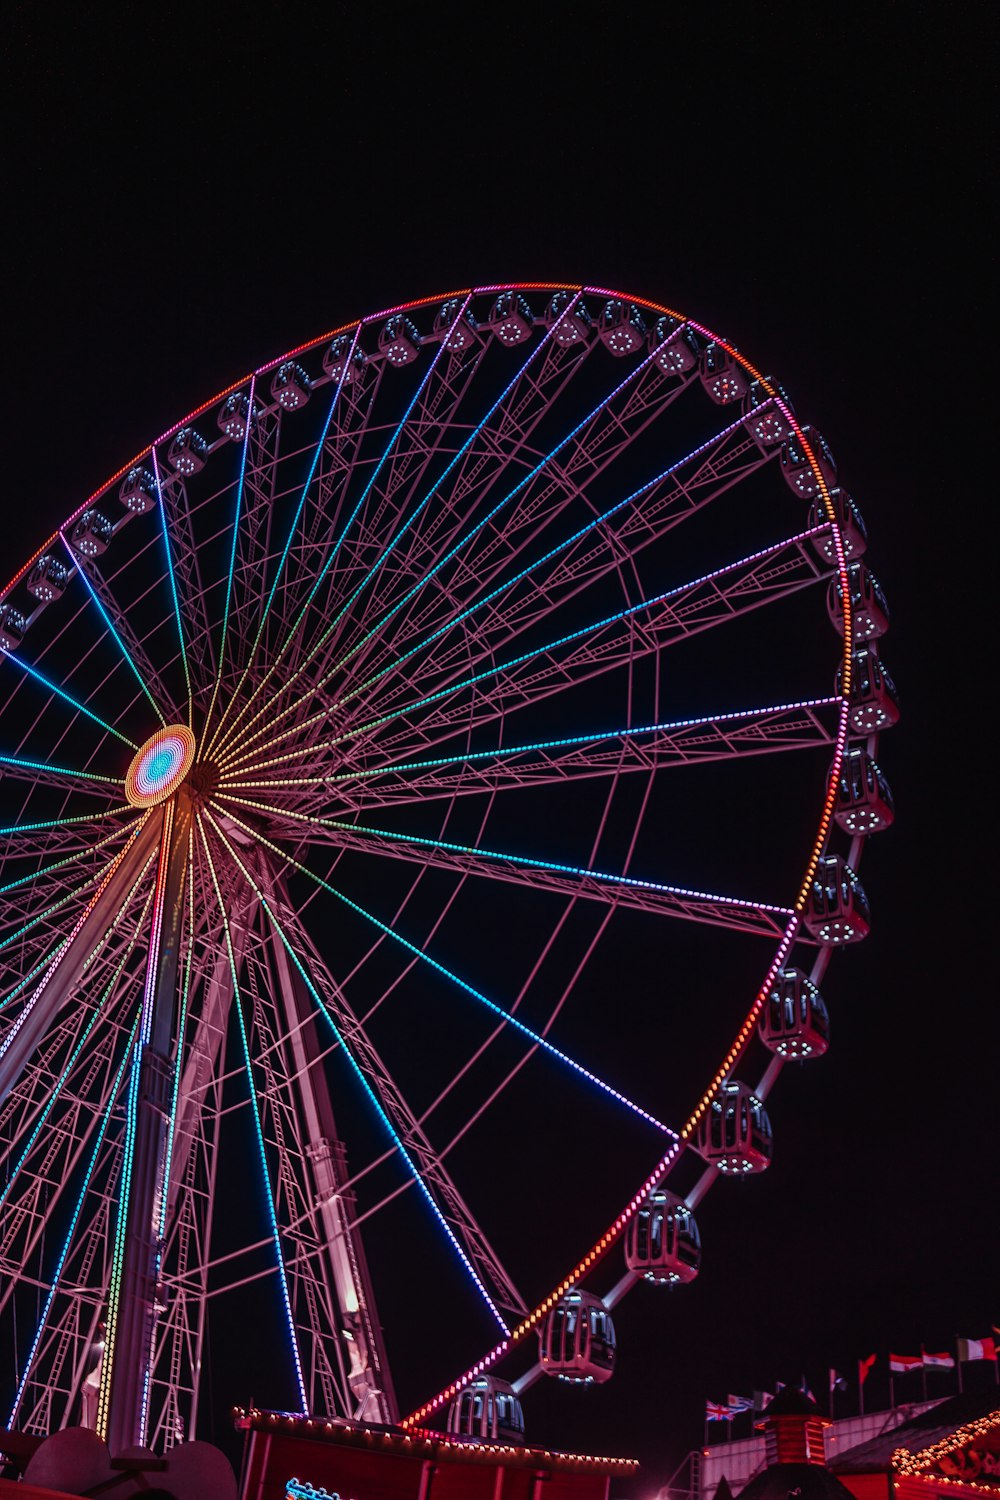 a large ferris wheel lit up at night